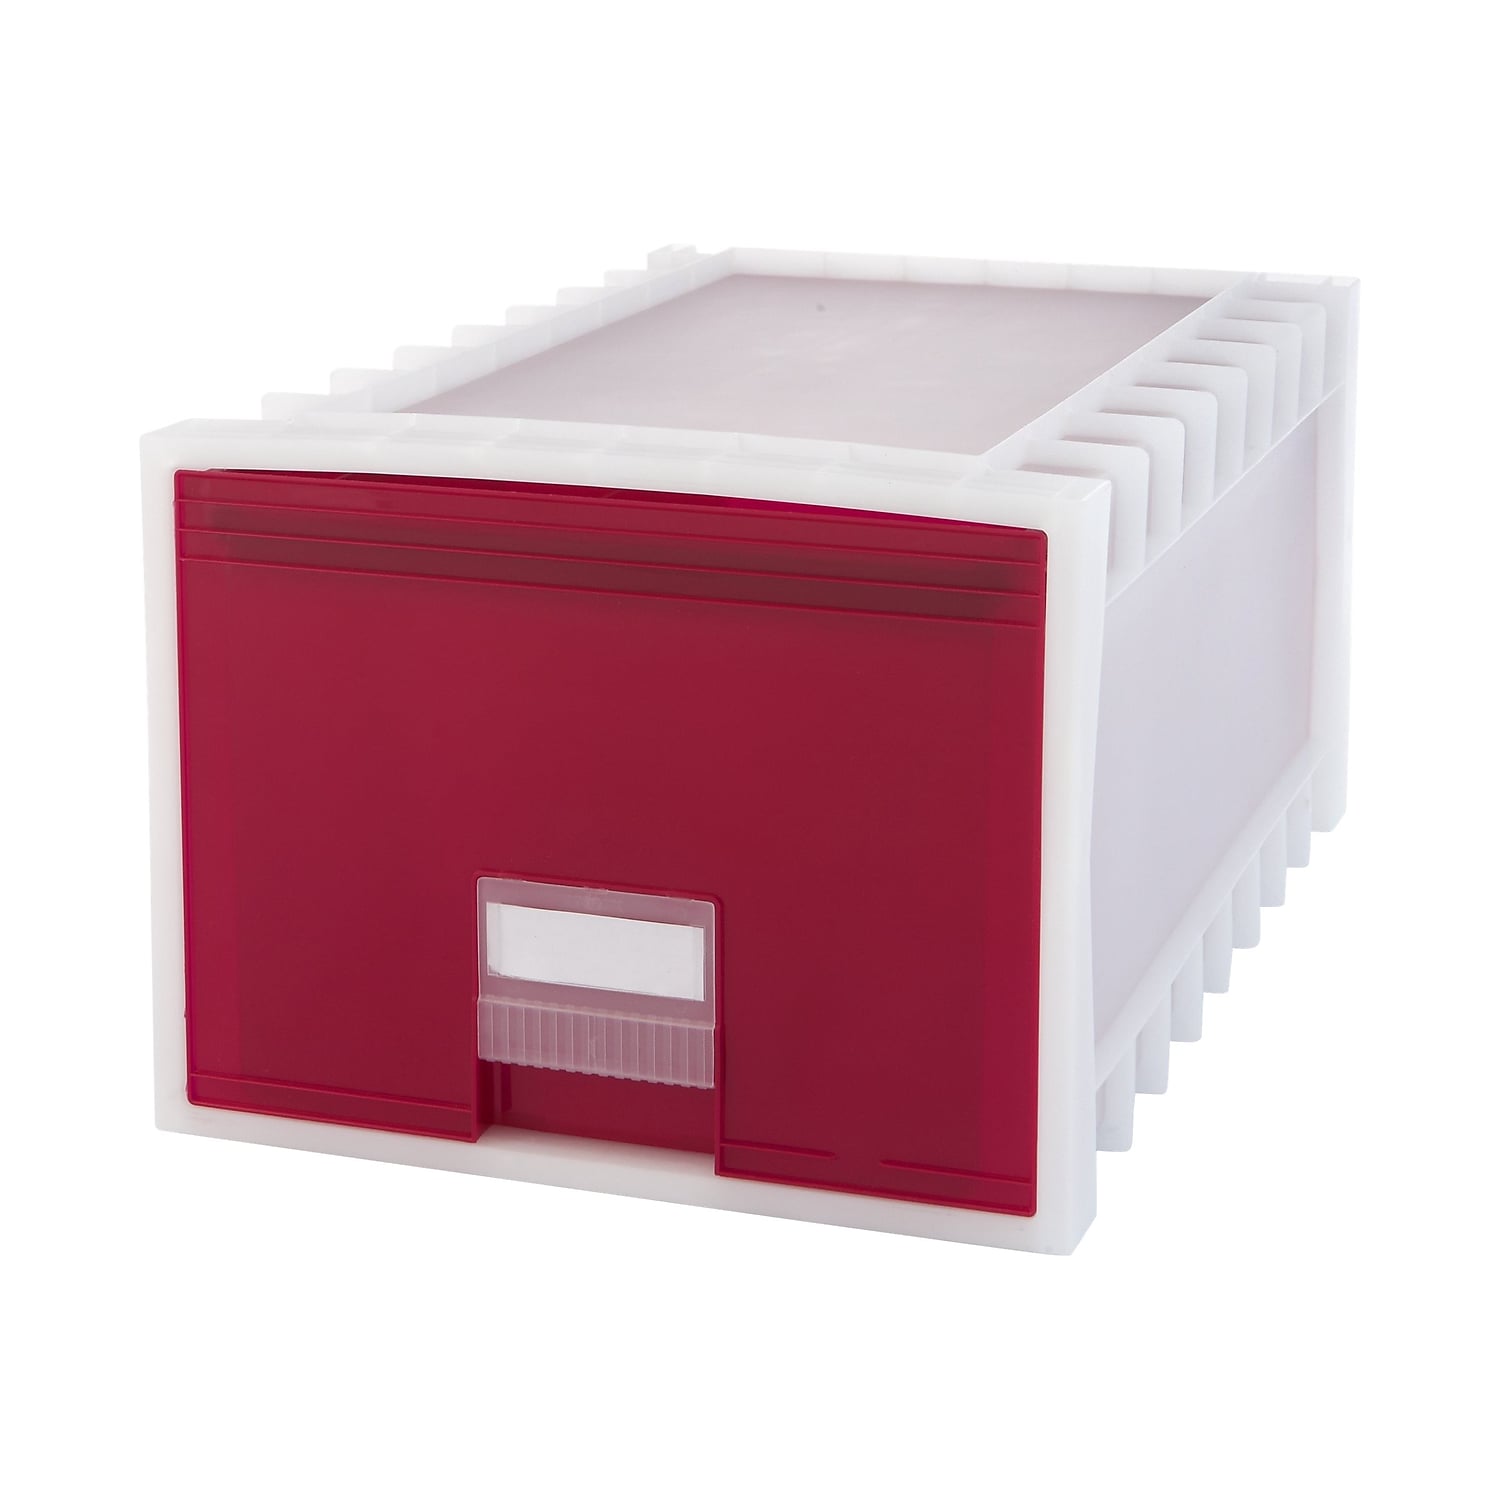 Storex  Plastic Archive Storage Box with Letter & Legal Size & 24 in. Drawer, White & Red - image 1 of 3